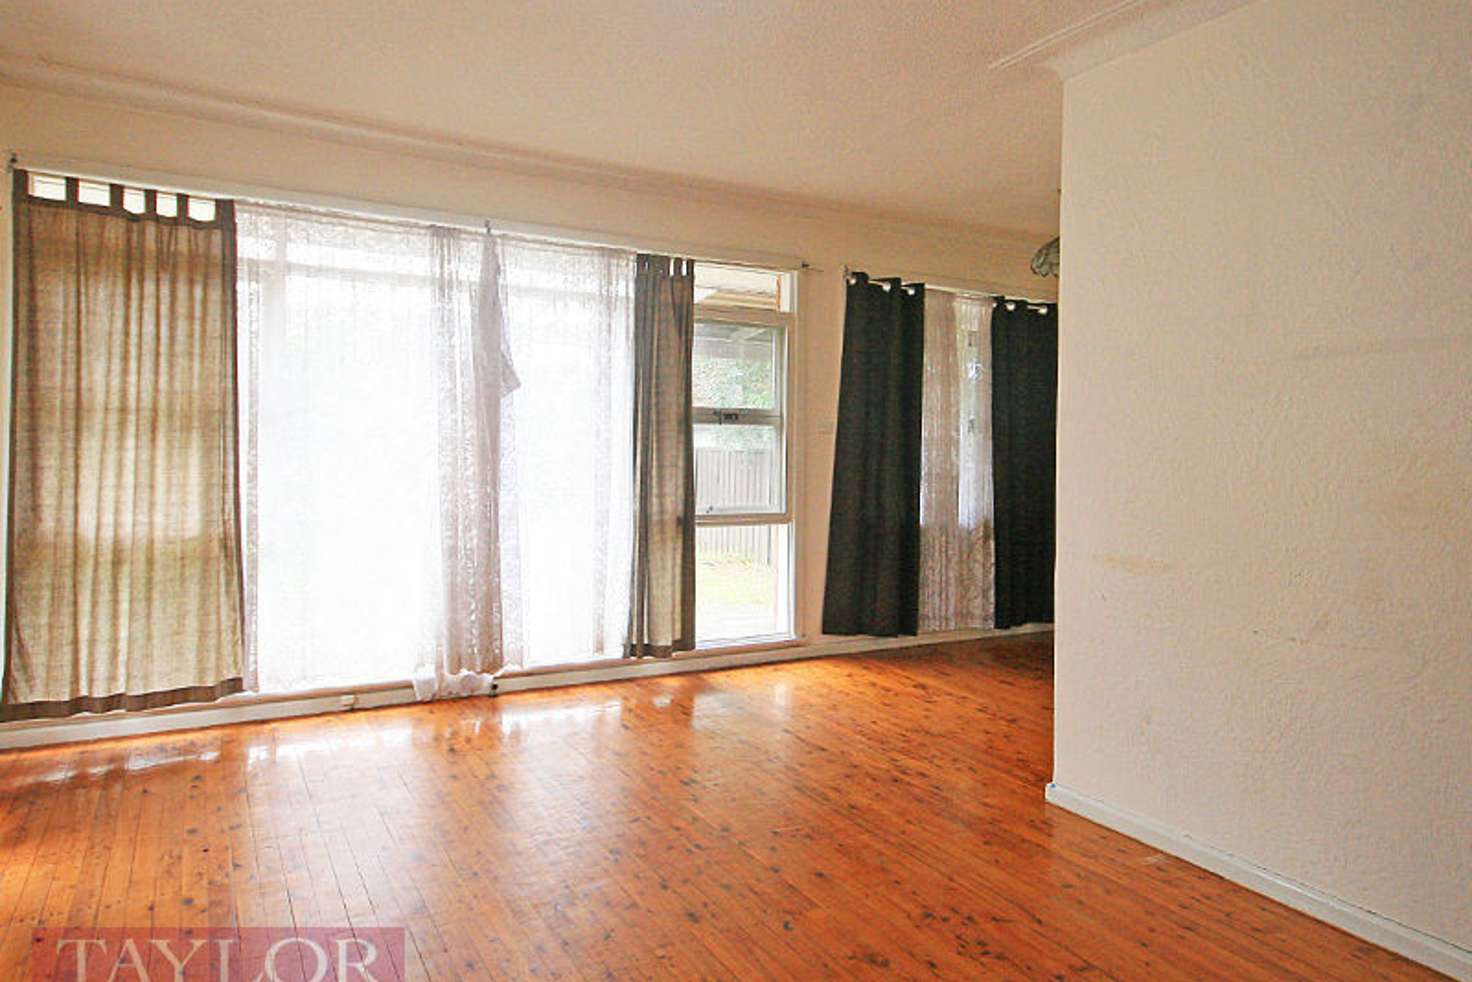 Main view of Homely house listing, 85 Railway Street, Parramatta NSW 2150